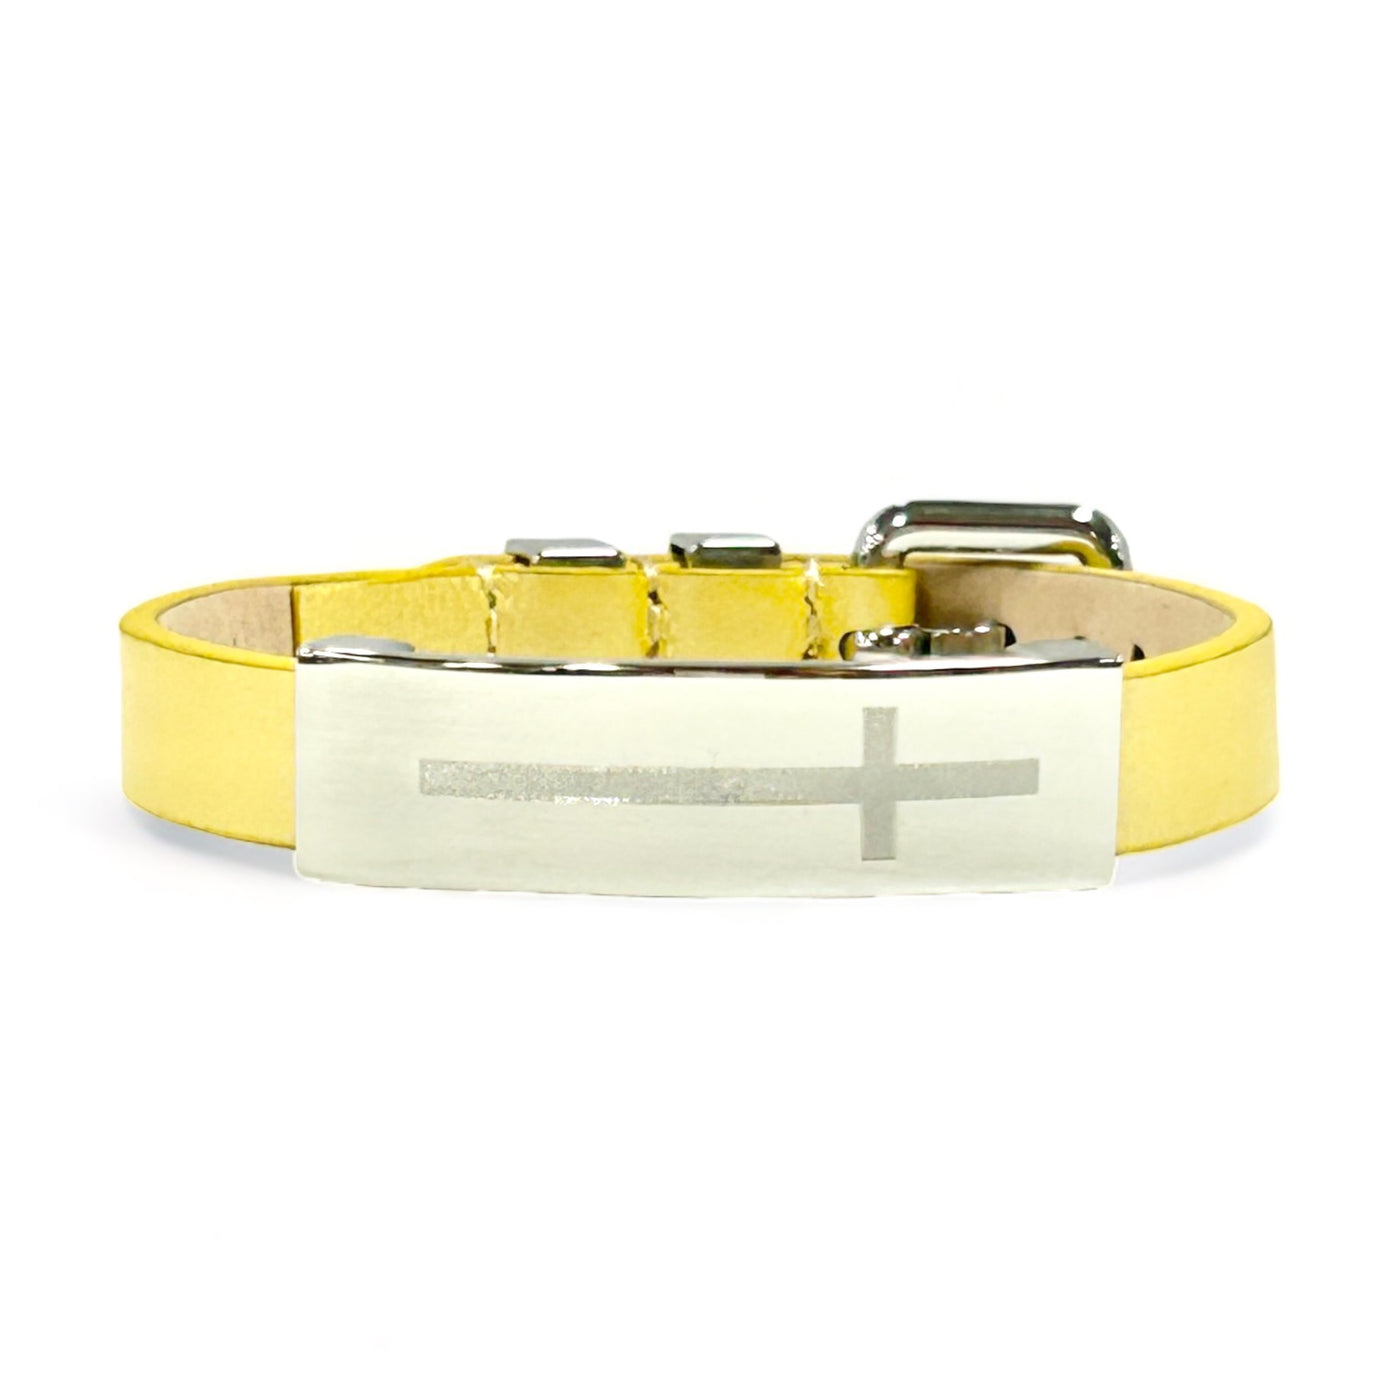 Betsy Metallic Yellow with Silver Plate - Cross